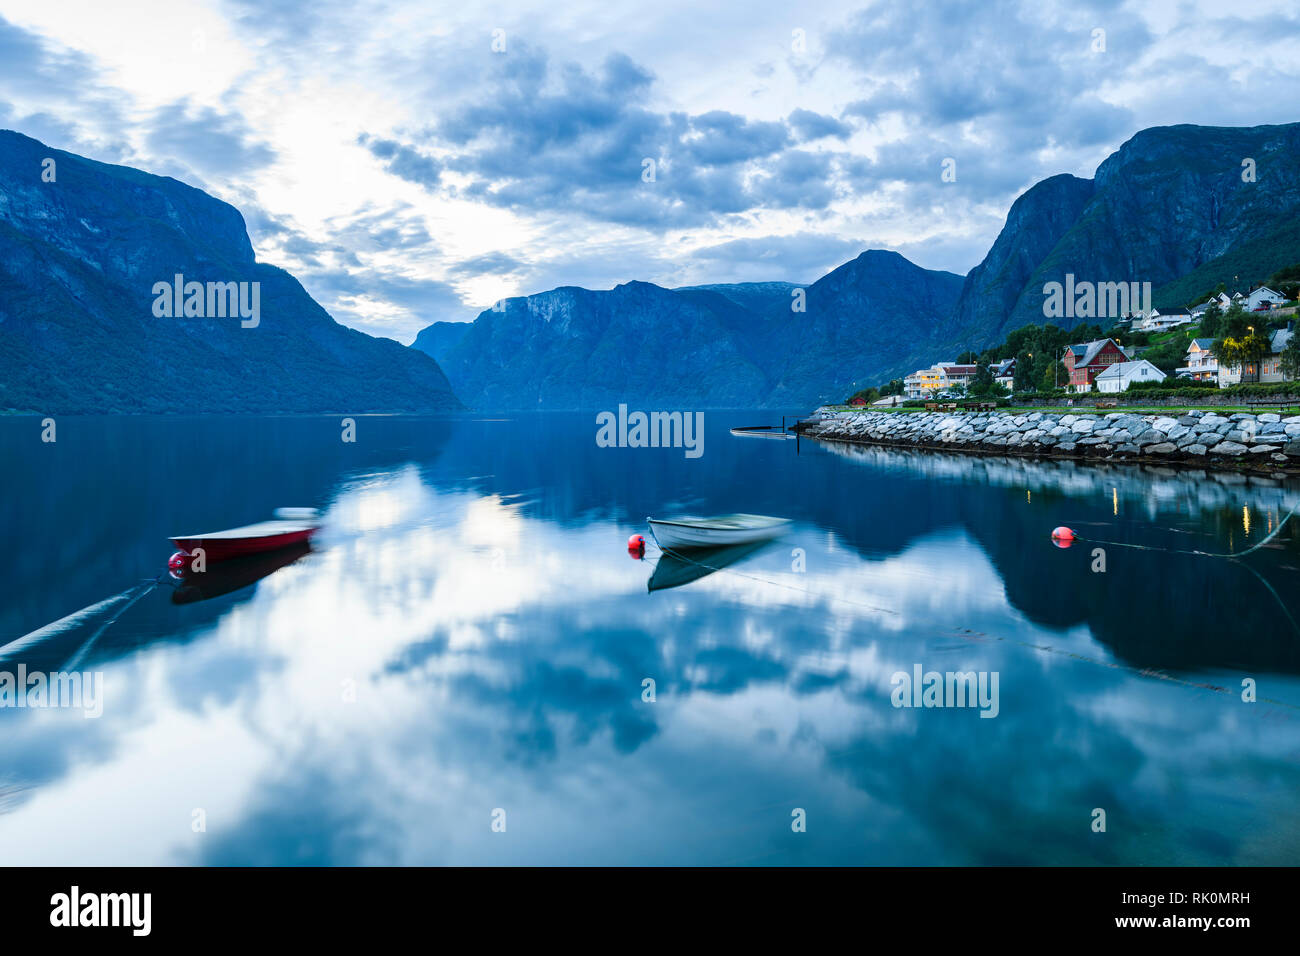 Village and mountains reflected on fjord at dusk, Aurland, Norway, Europe Stock Photo